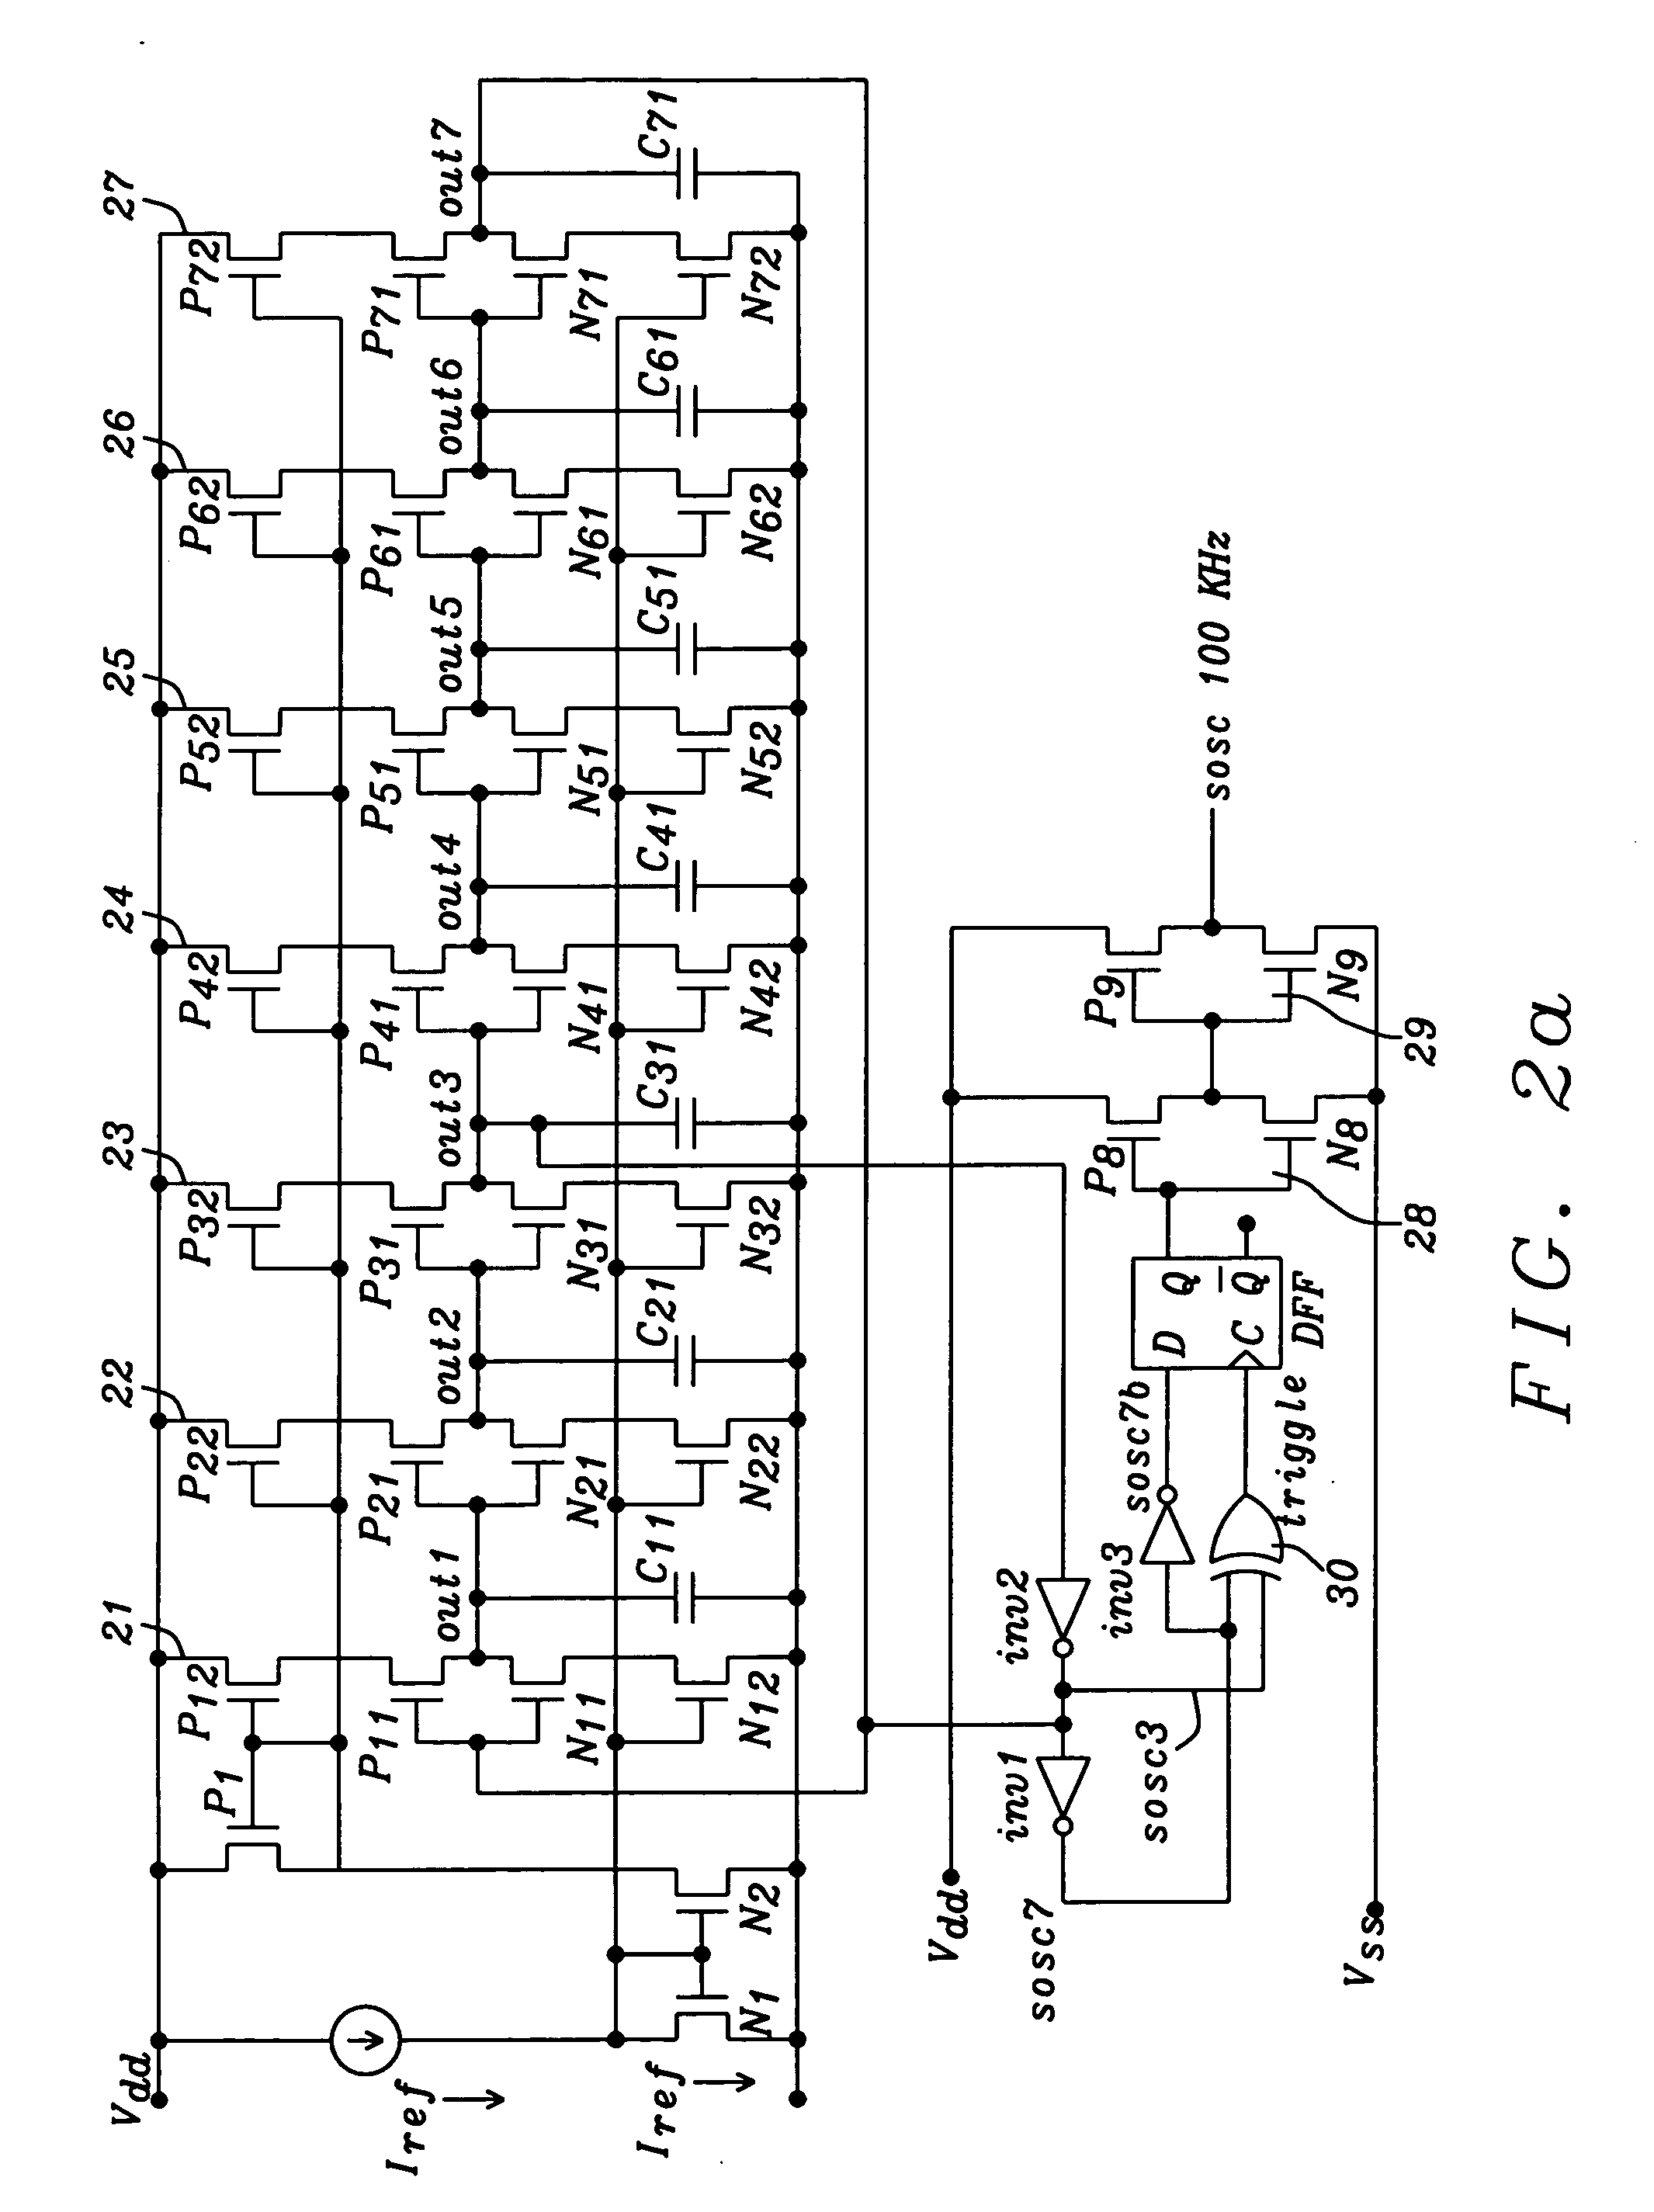 Ring oscillator with constant 50% duty cycle and ground-noise insensitive